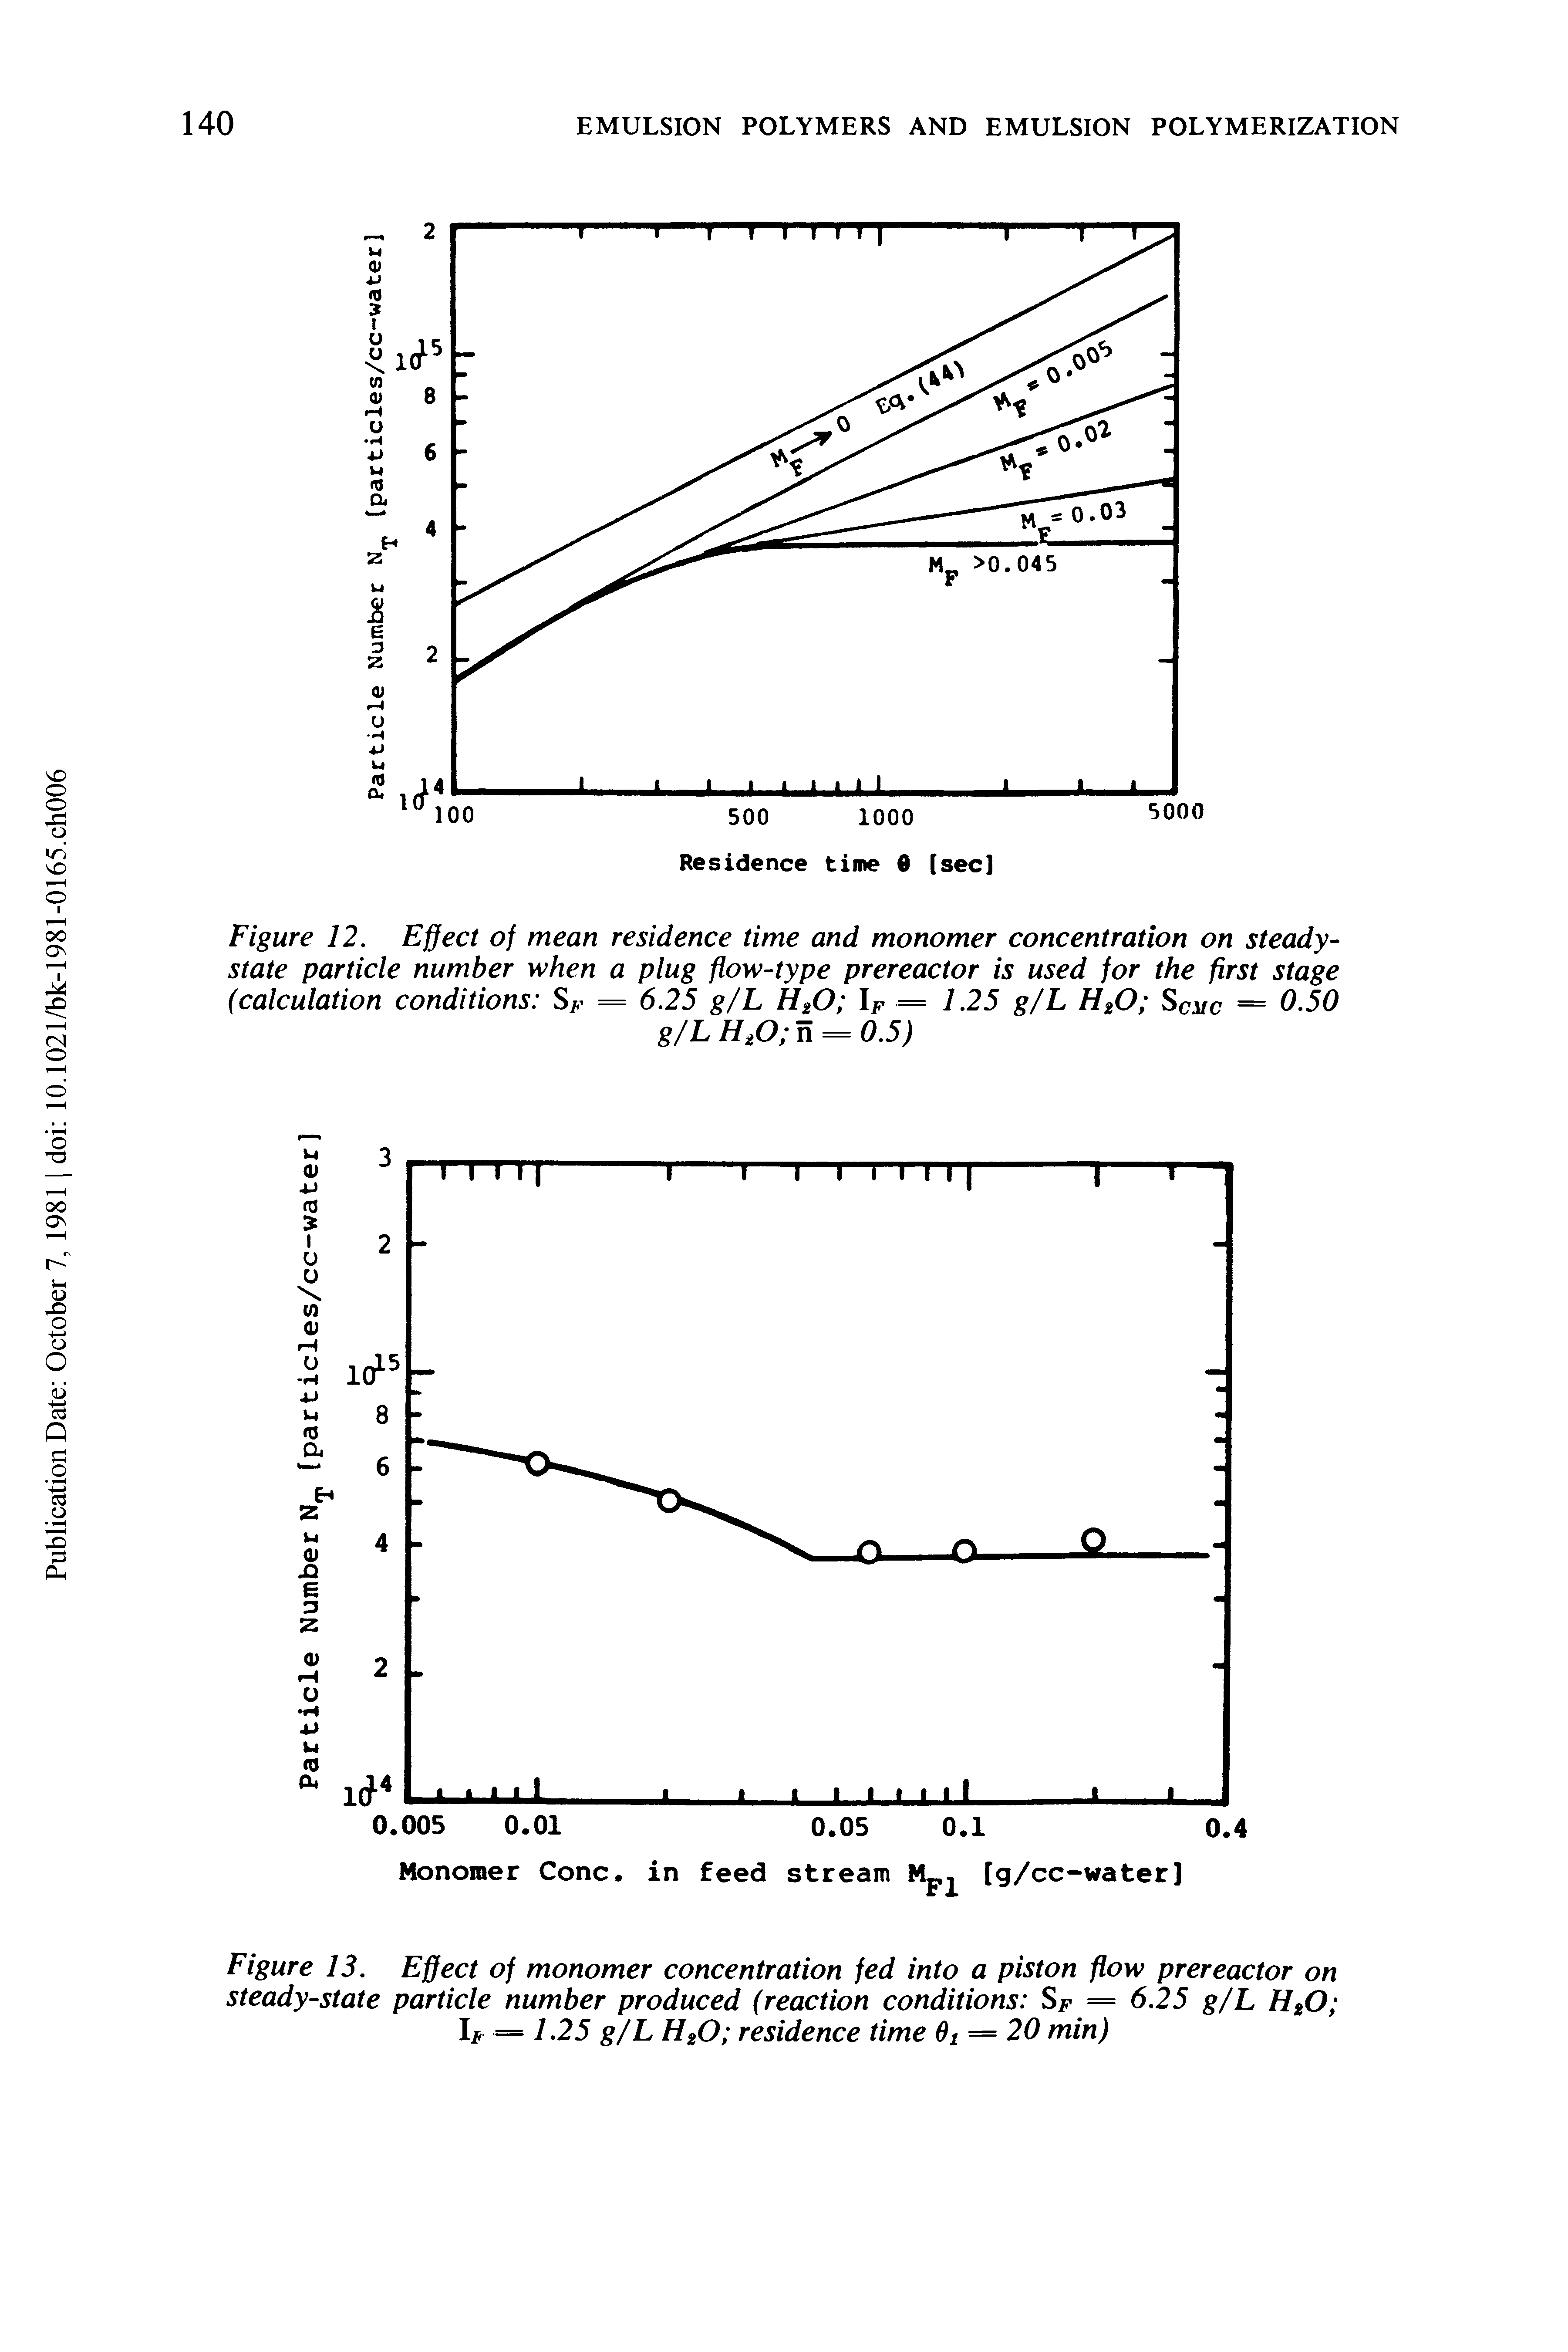 Figure 12. Effect of mean residence time and monomer concentration on steady-state particle number when a plug flow-type prereactor is used for the first stage (calculation conditions SF = 6.25 g/L H20 lF = 1.25 g/L H20 SCmc = 0.50...